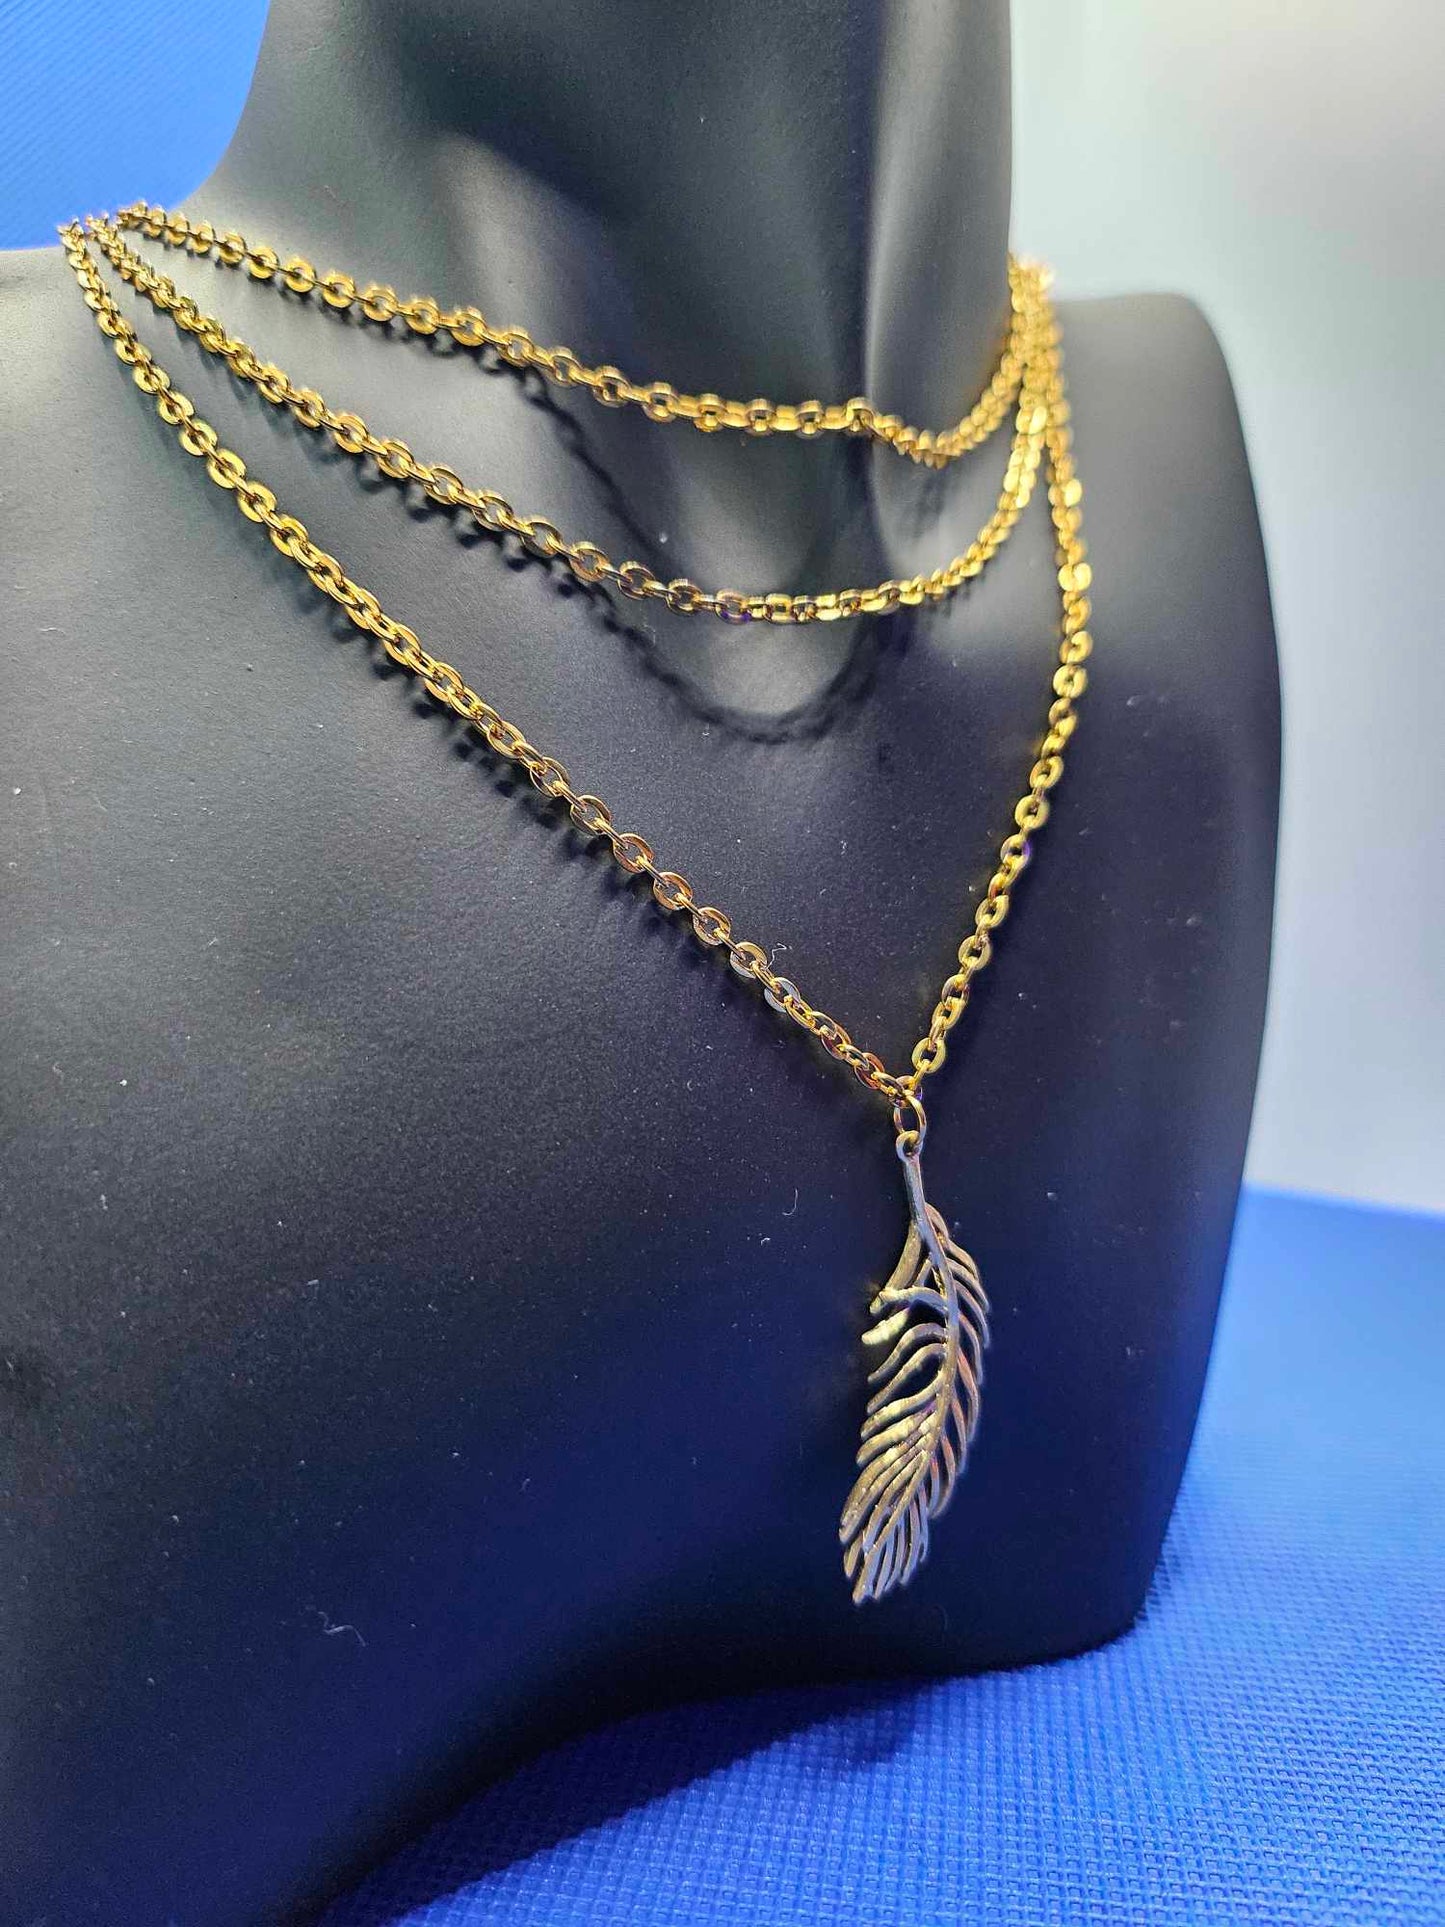 3 Layer Golden Chain with Feather